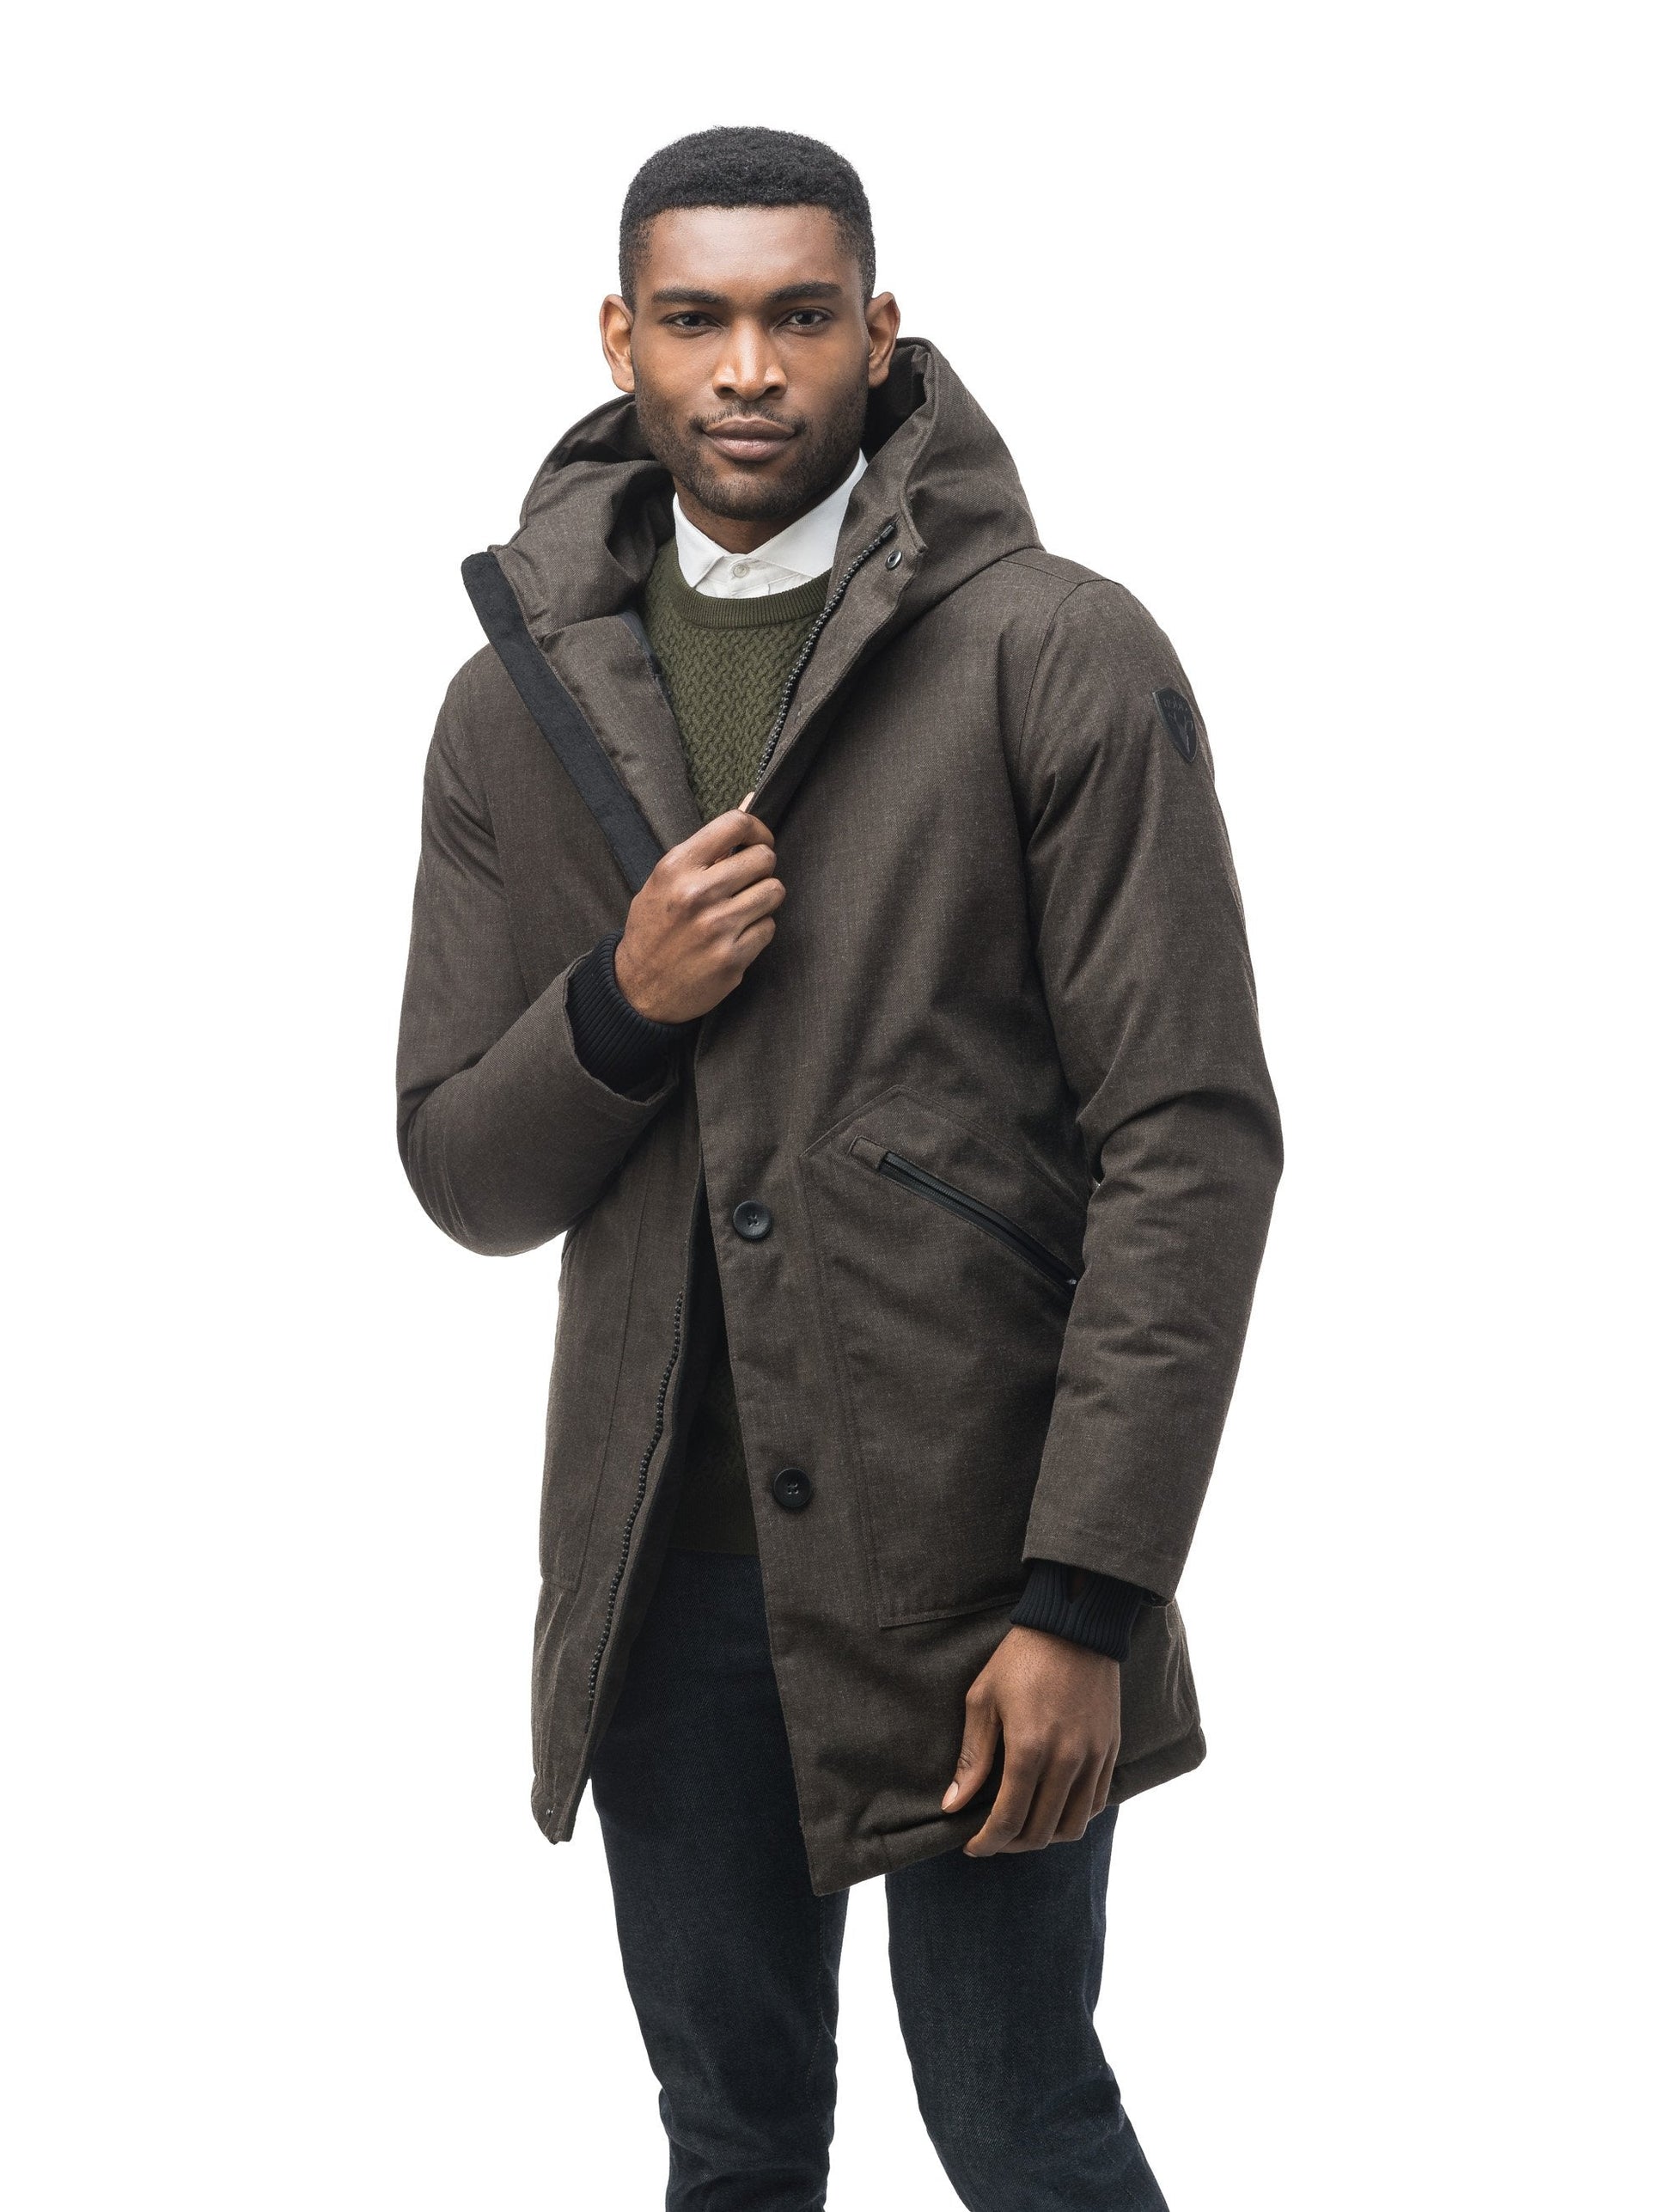 Men's fur free hooded parka with zipper and button closure placket featuring two oversized front pockets in H. Brown